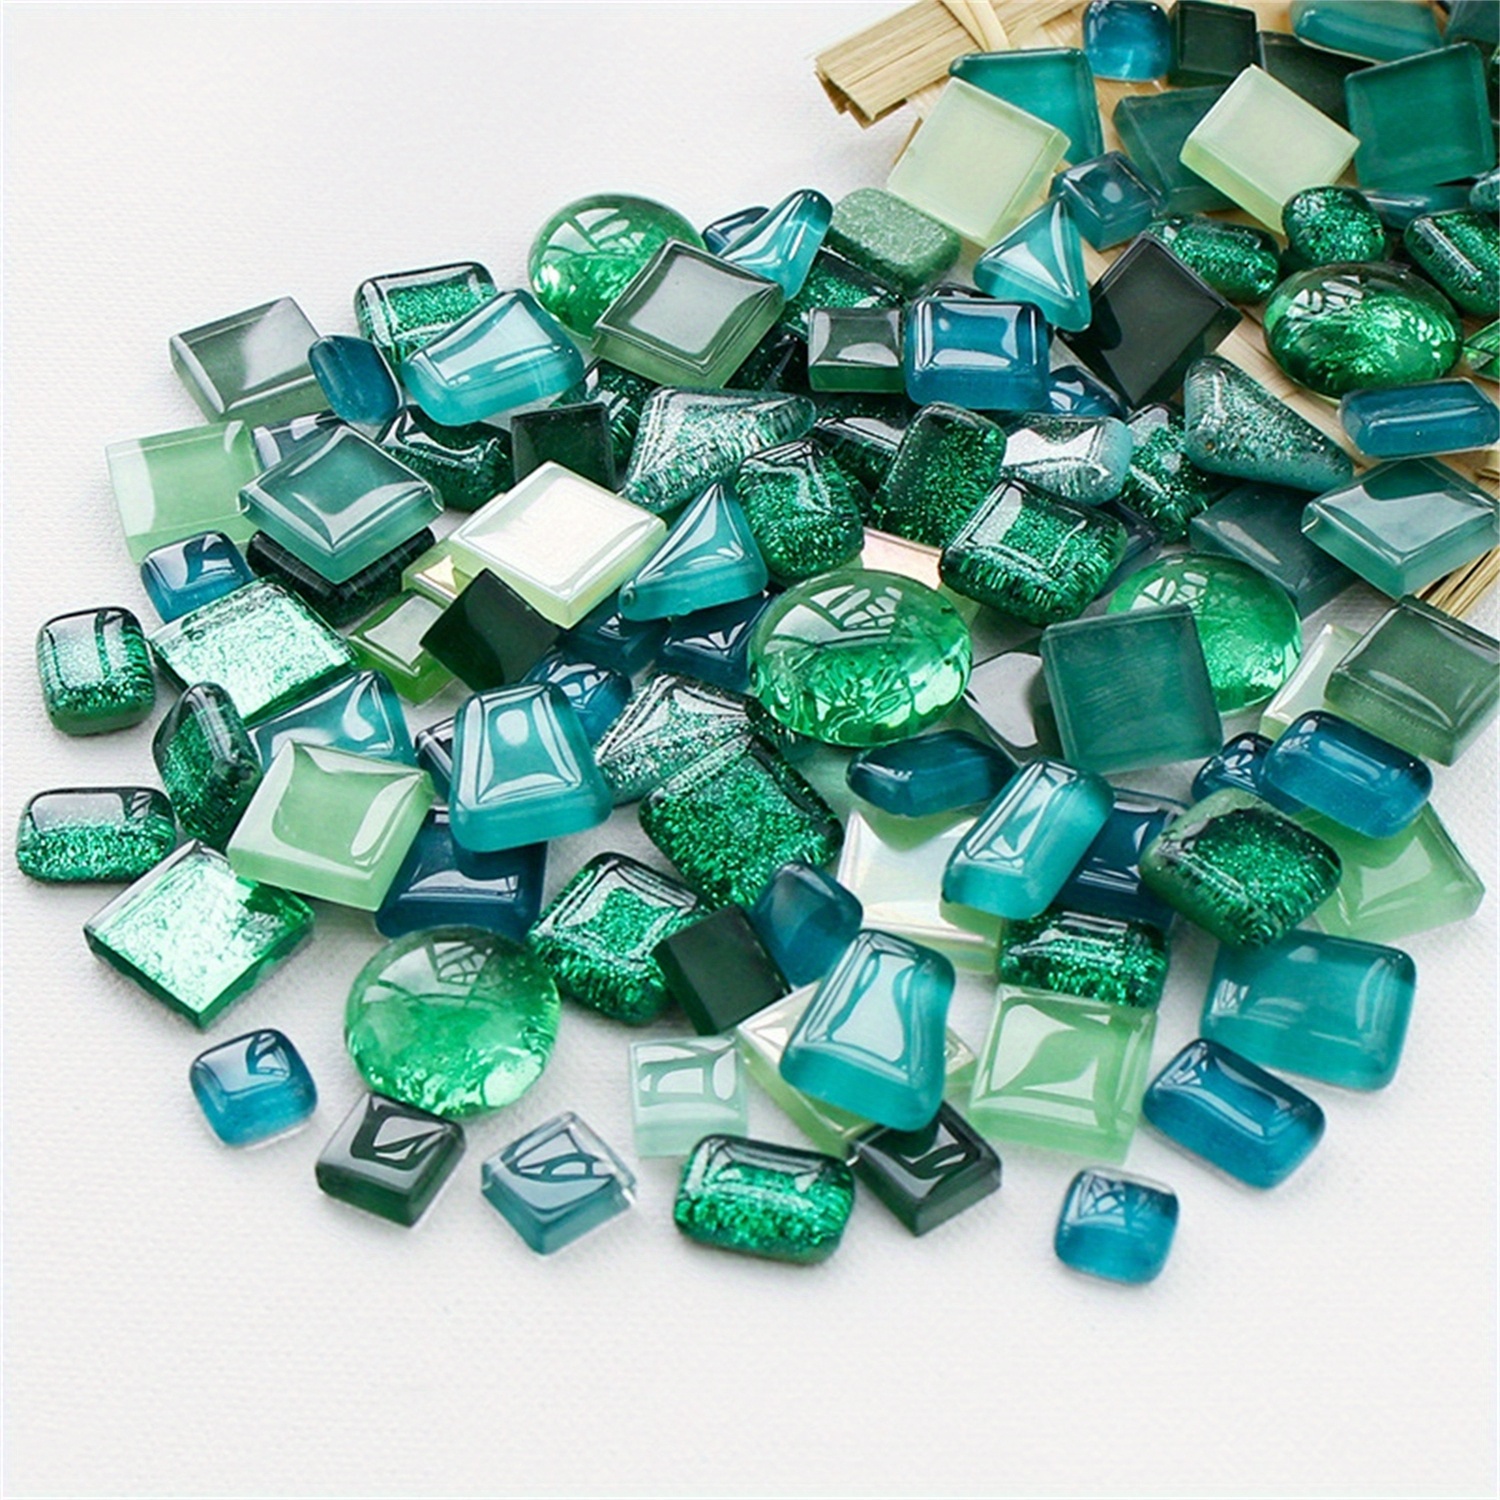 

100g Piece Of Vibrant Green Glass Mosaic Tiles - Perfect For Diy Crafts & Decor